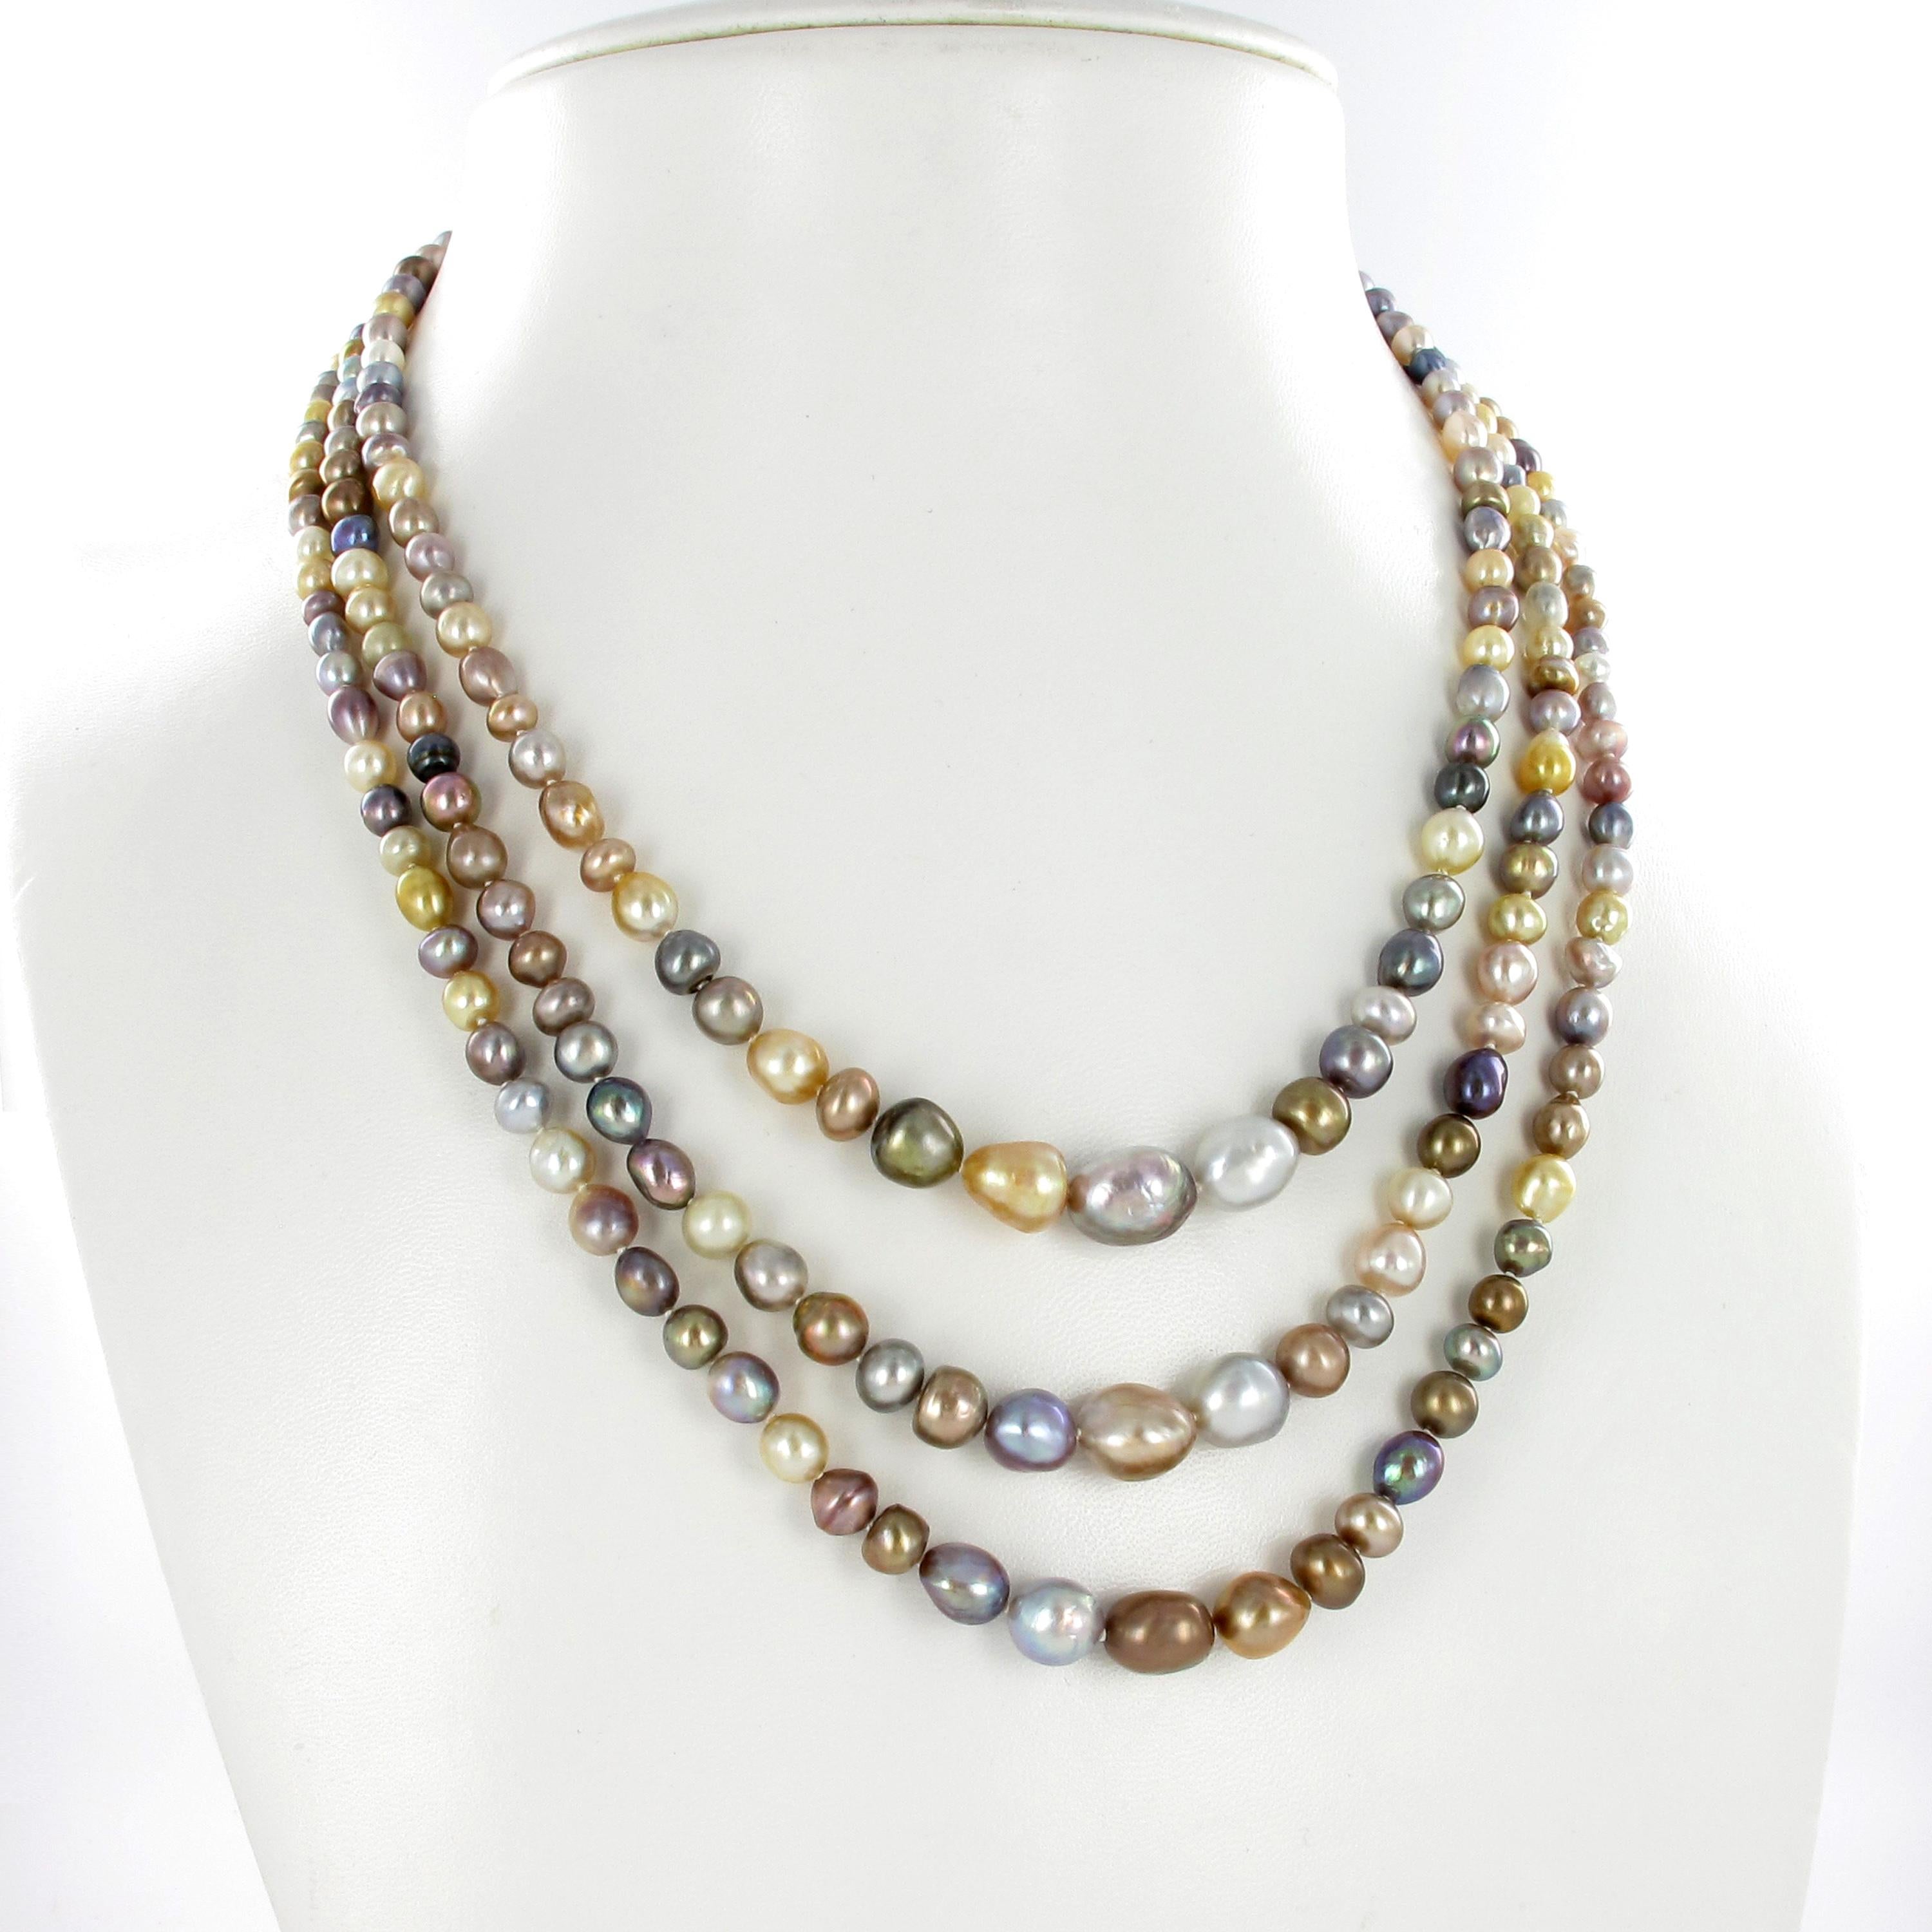 This marvelous 3-strand necklace consists of 258 multicolored natural pearls of various shapes and sizes. Softly graduated and elegantly spaced rows. 
The antique clasp in 18 karat white gold is set with a 1.20 carats Old European cut diamond of K